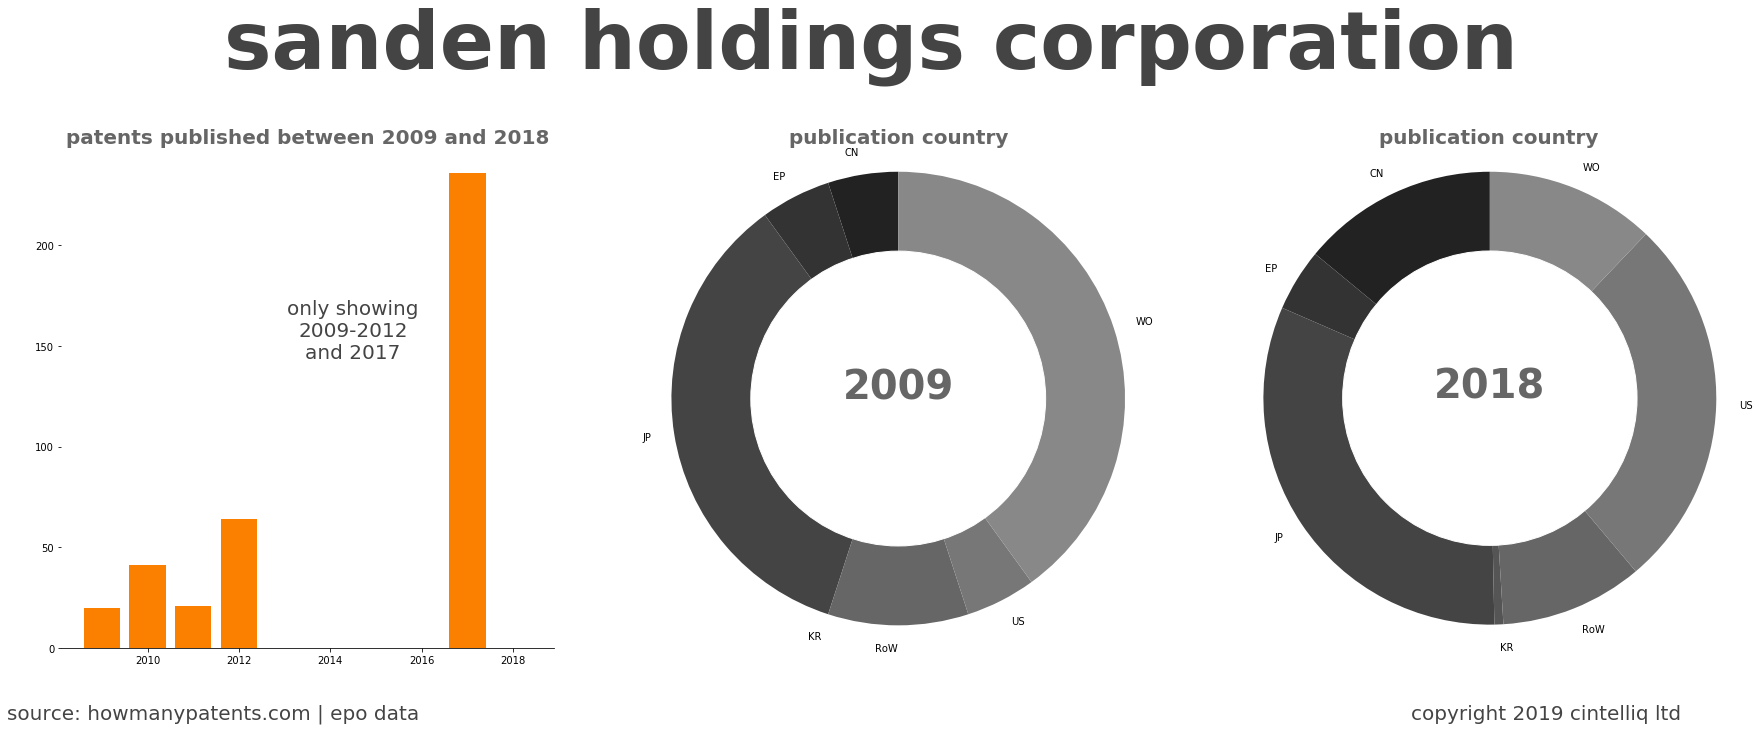 summary of patents for Sanden Holdings Corporation